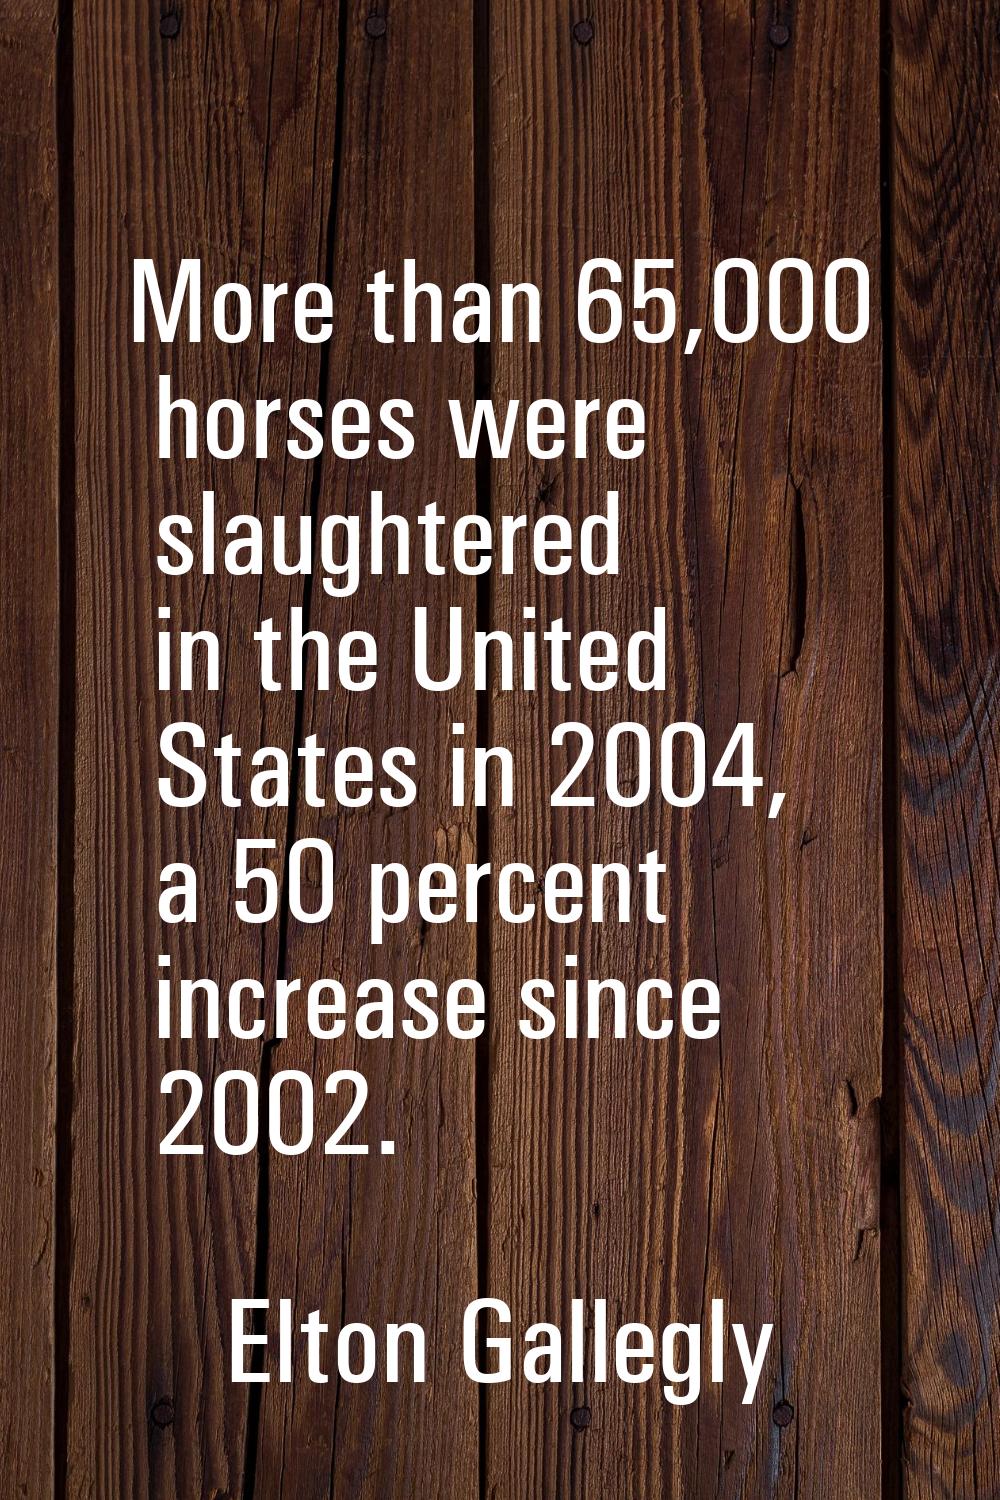 More than 65,000 horses were slaughtered in the United States in 2004, a 50 percent increase since 